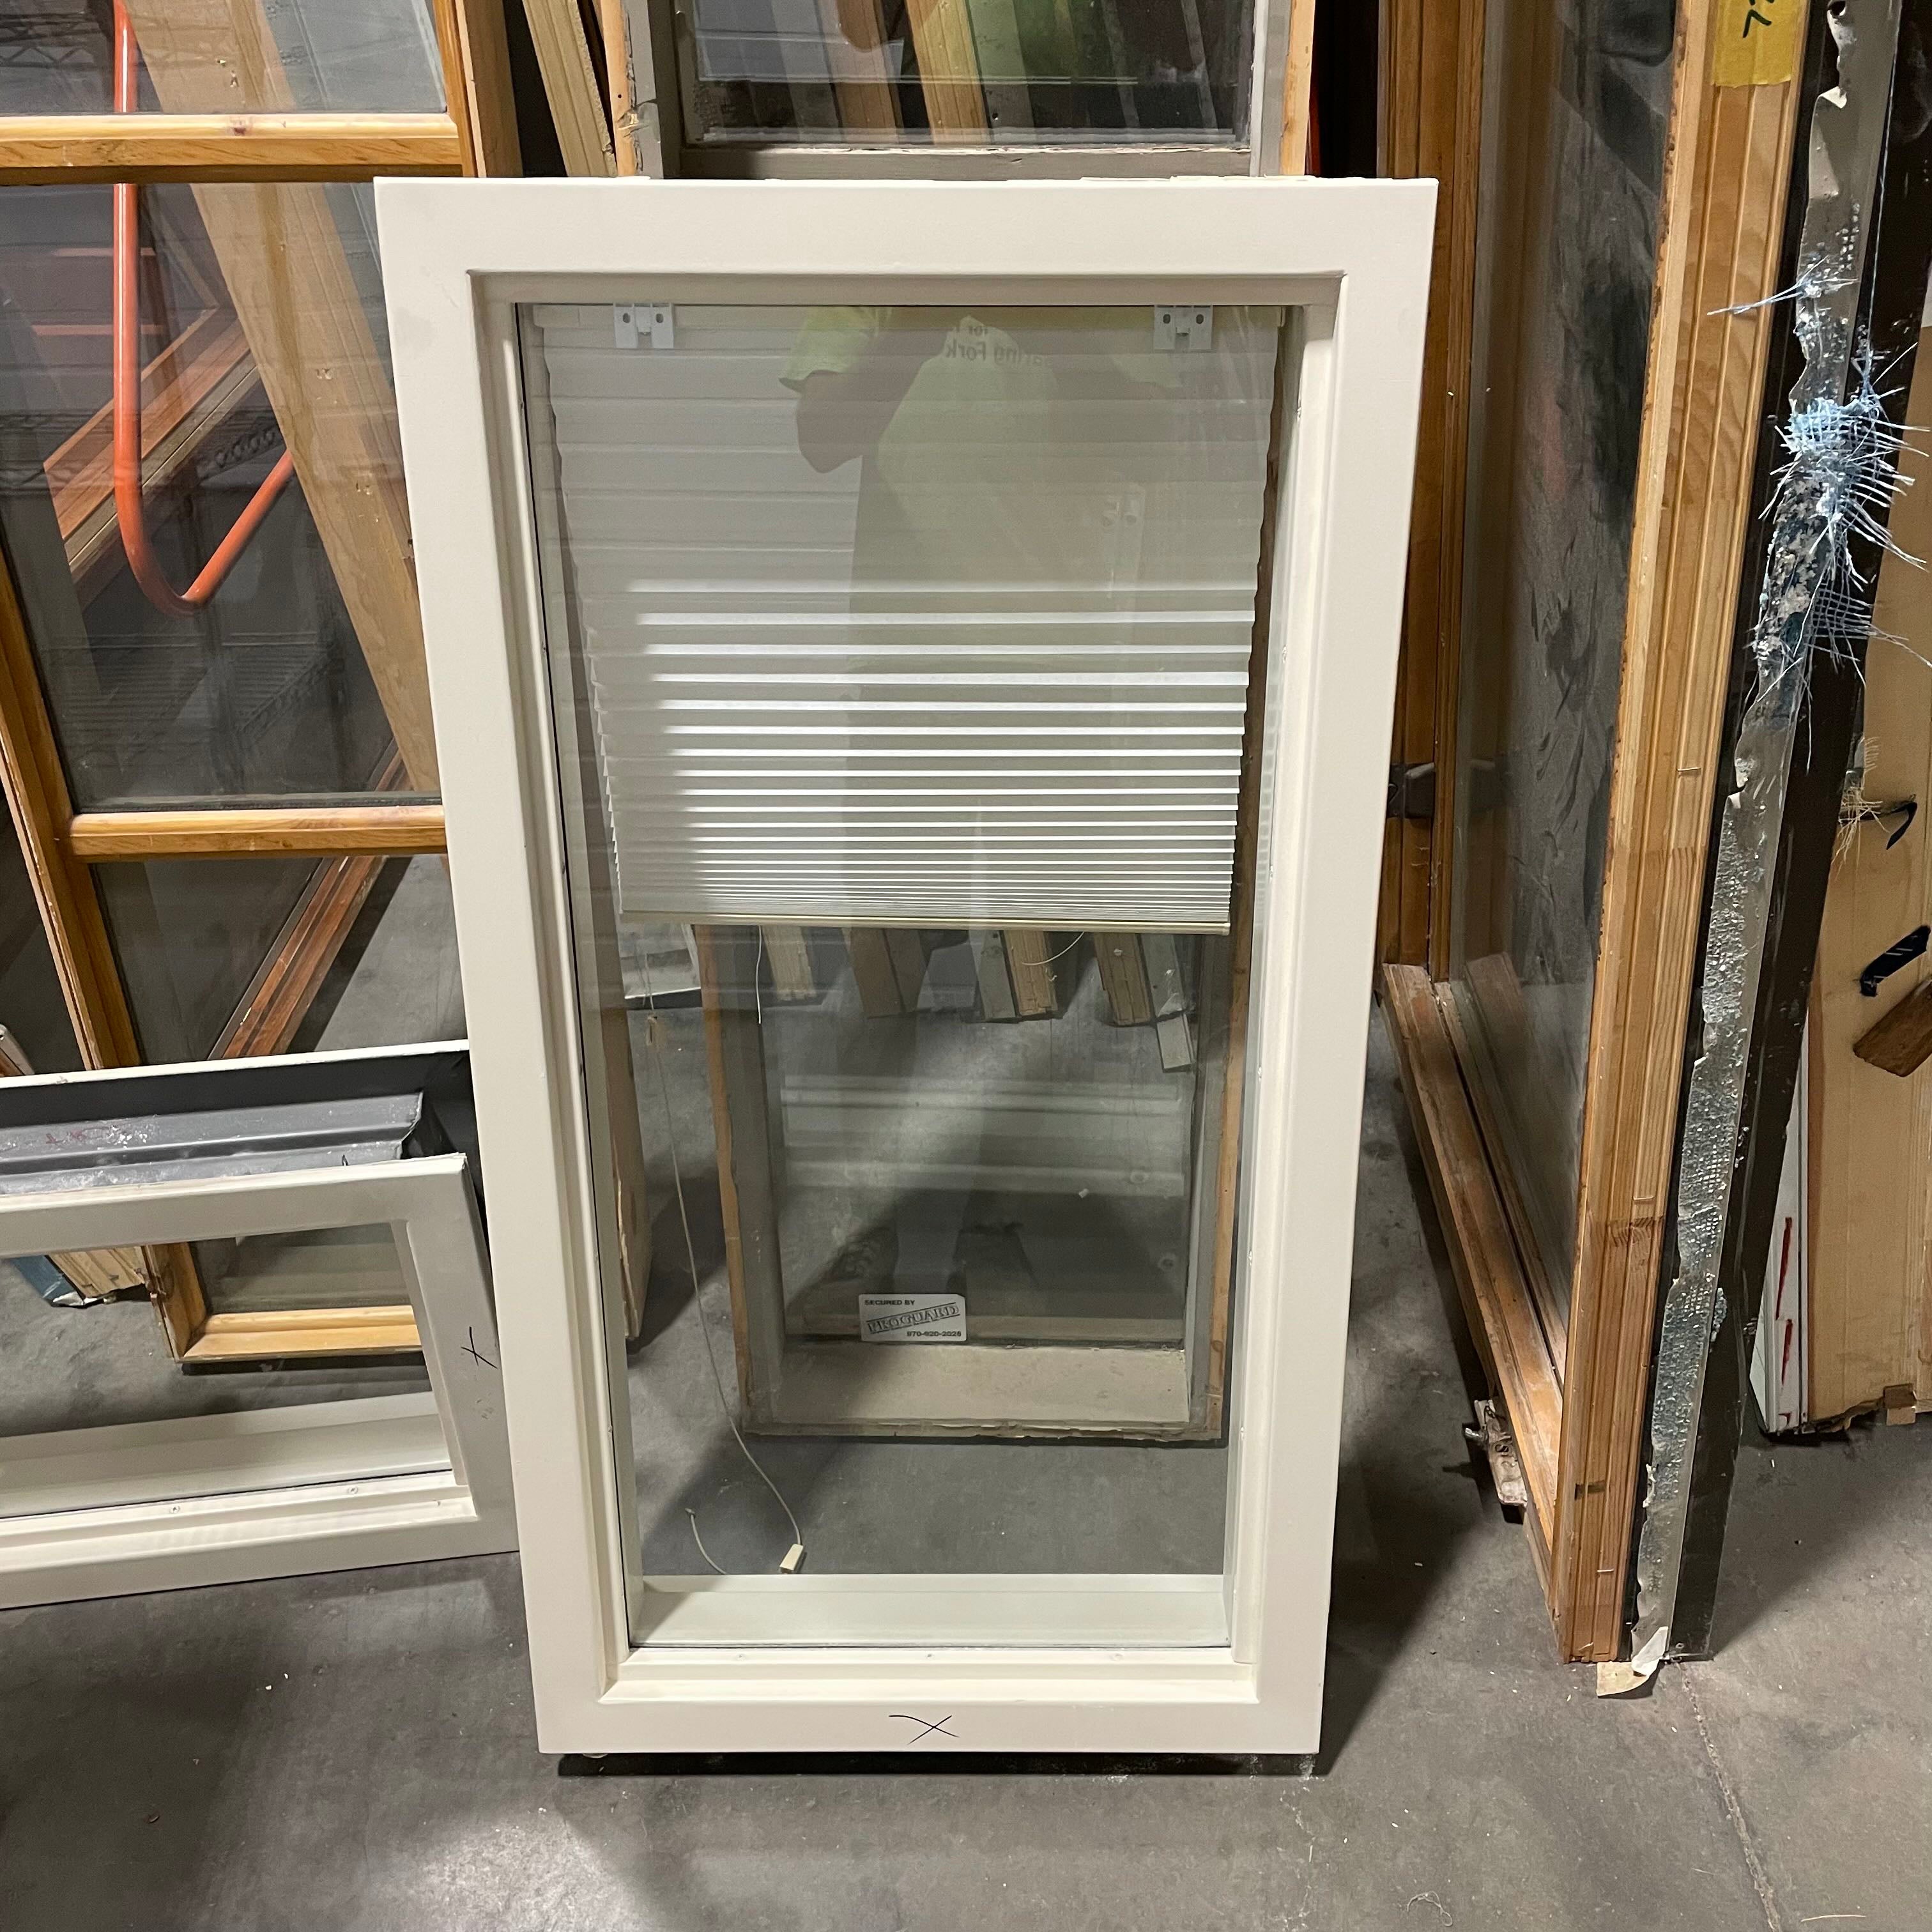 24"x 45"x 6.25" Painted White Metal Both Sides Fixed Exterior Window